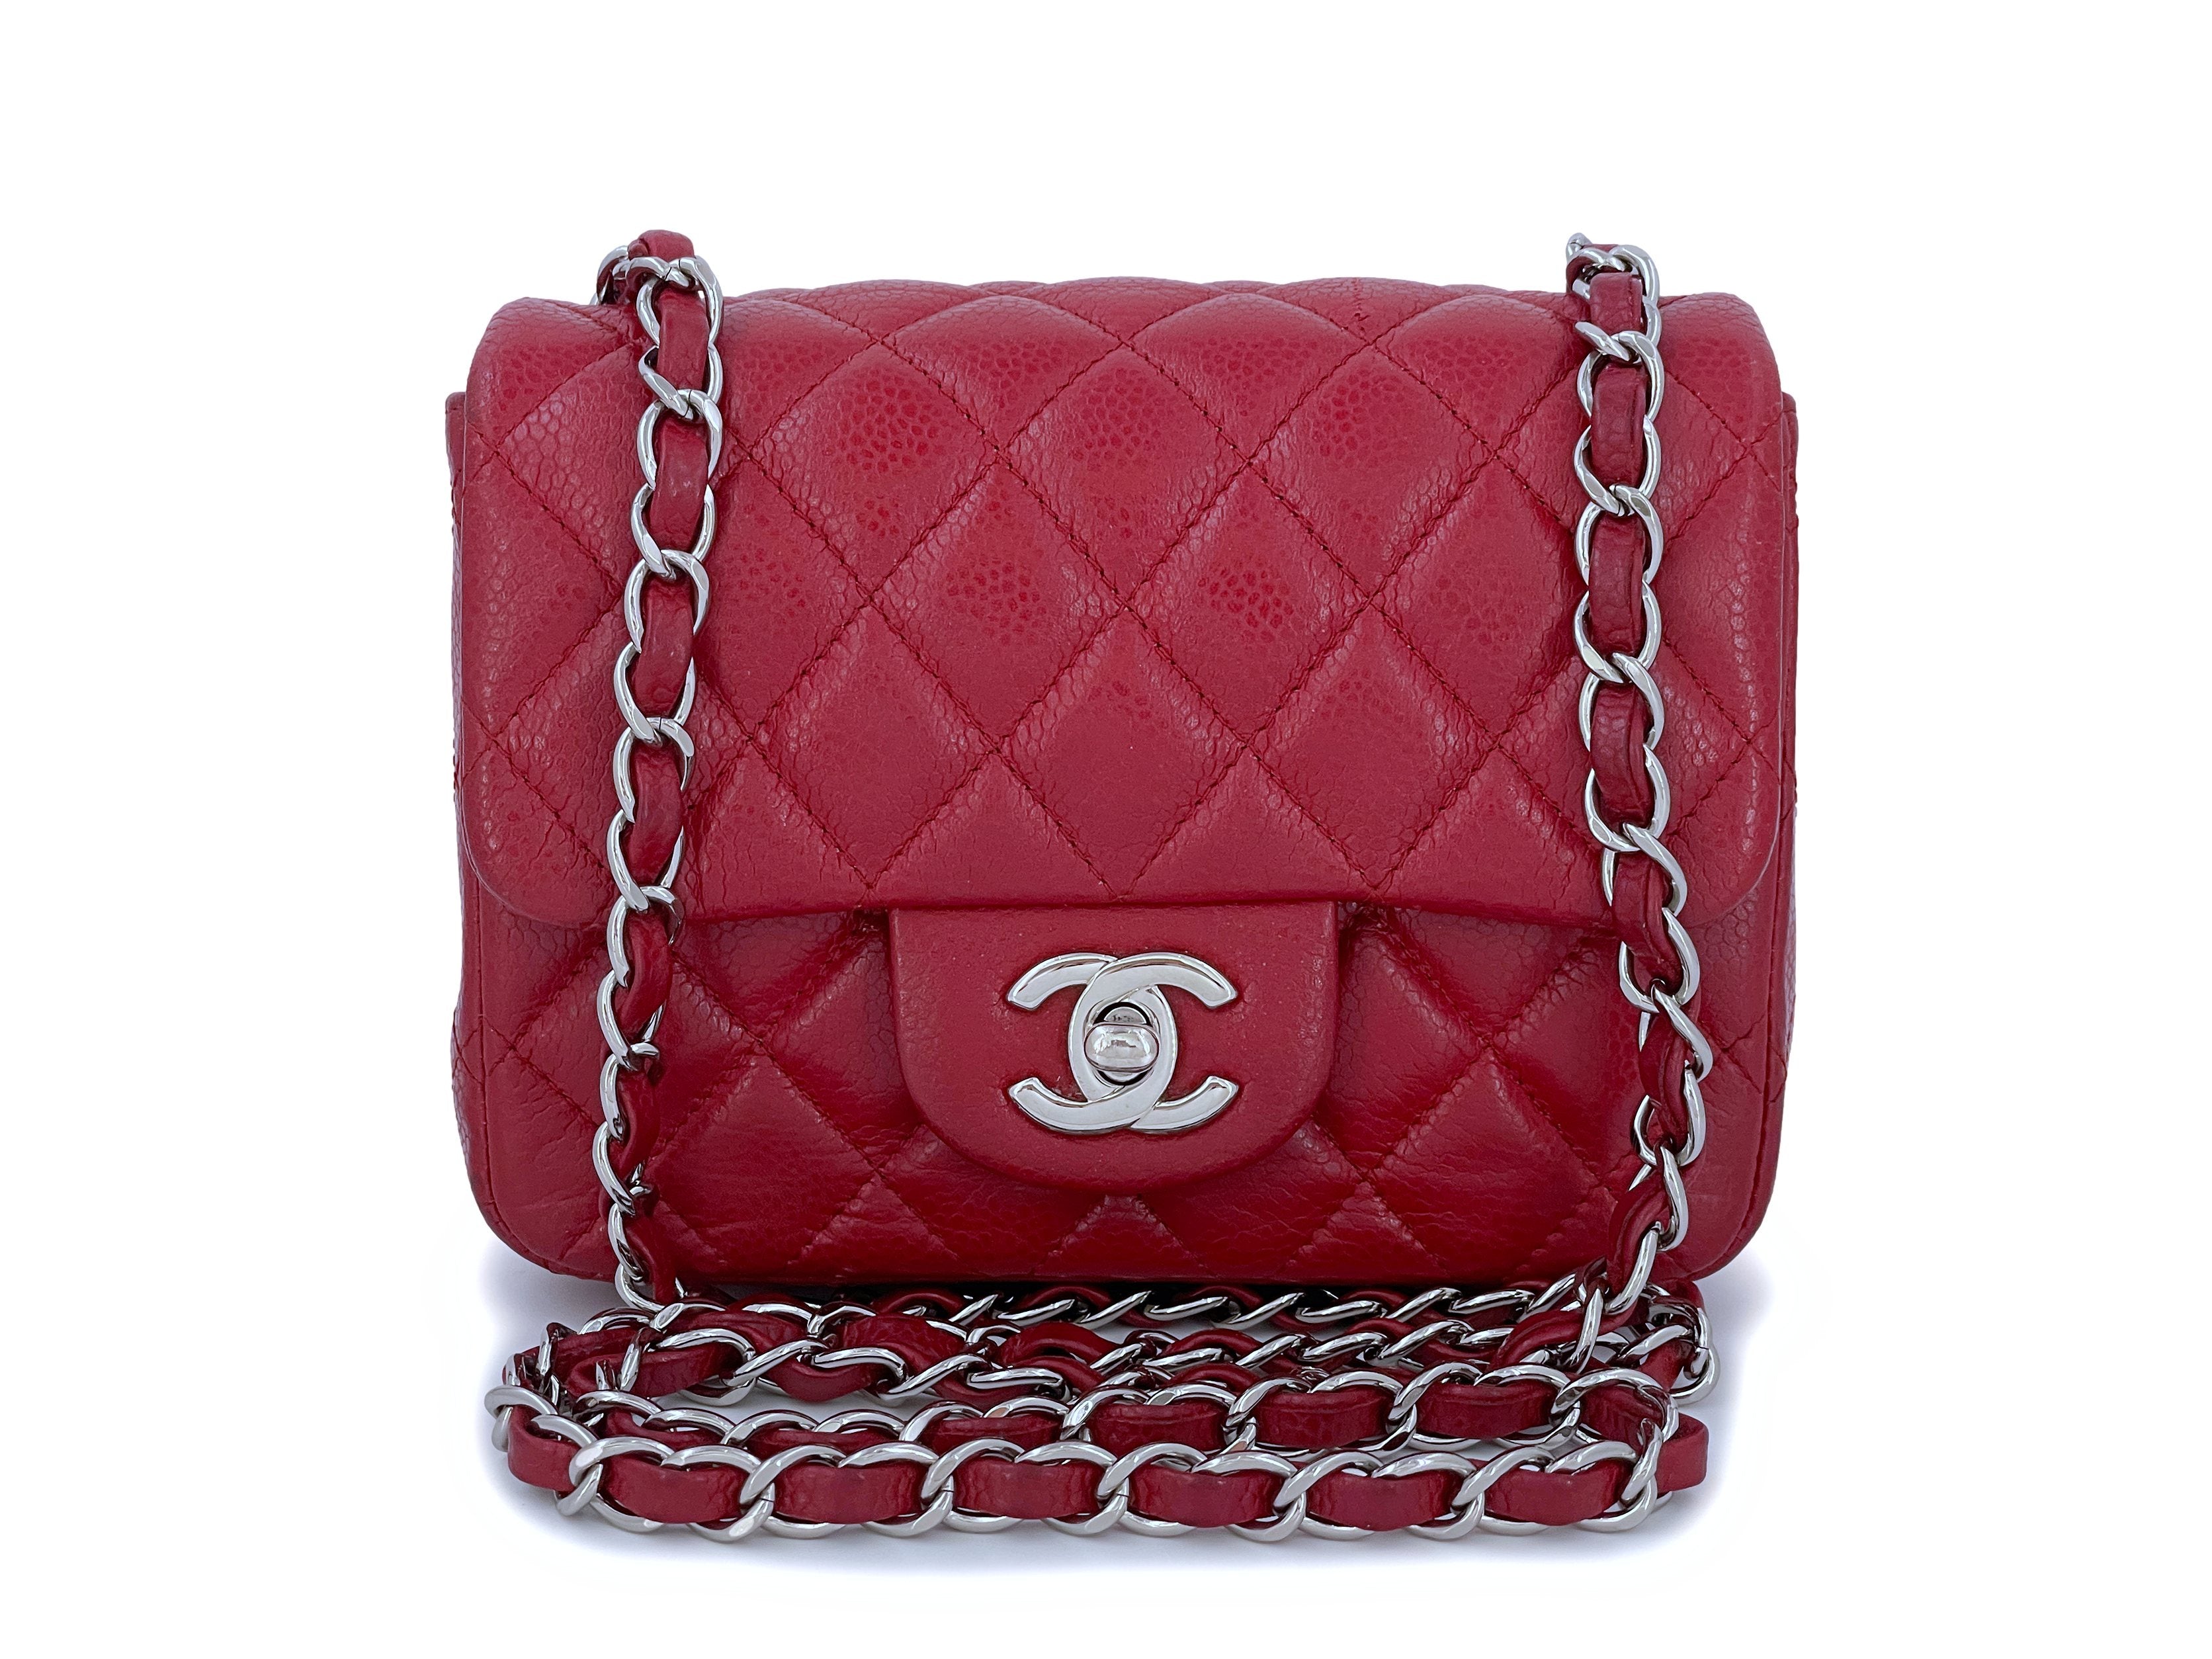 CHANEL Pink Quilted Lambskin Vintage Square Mini Flap Bag